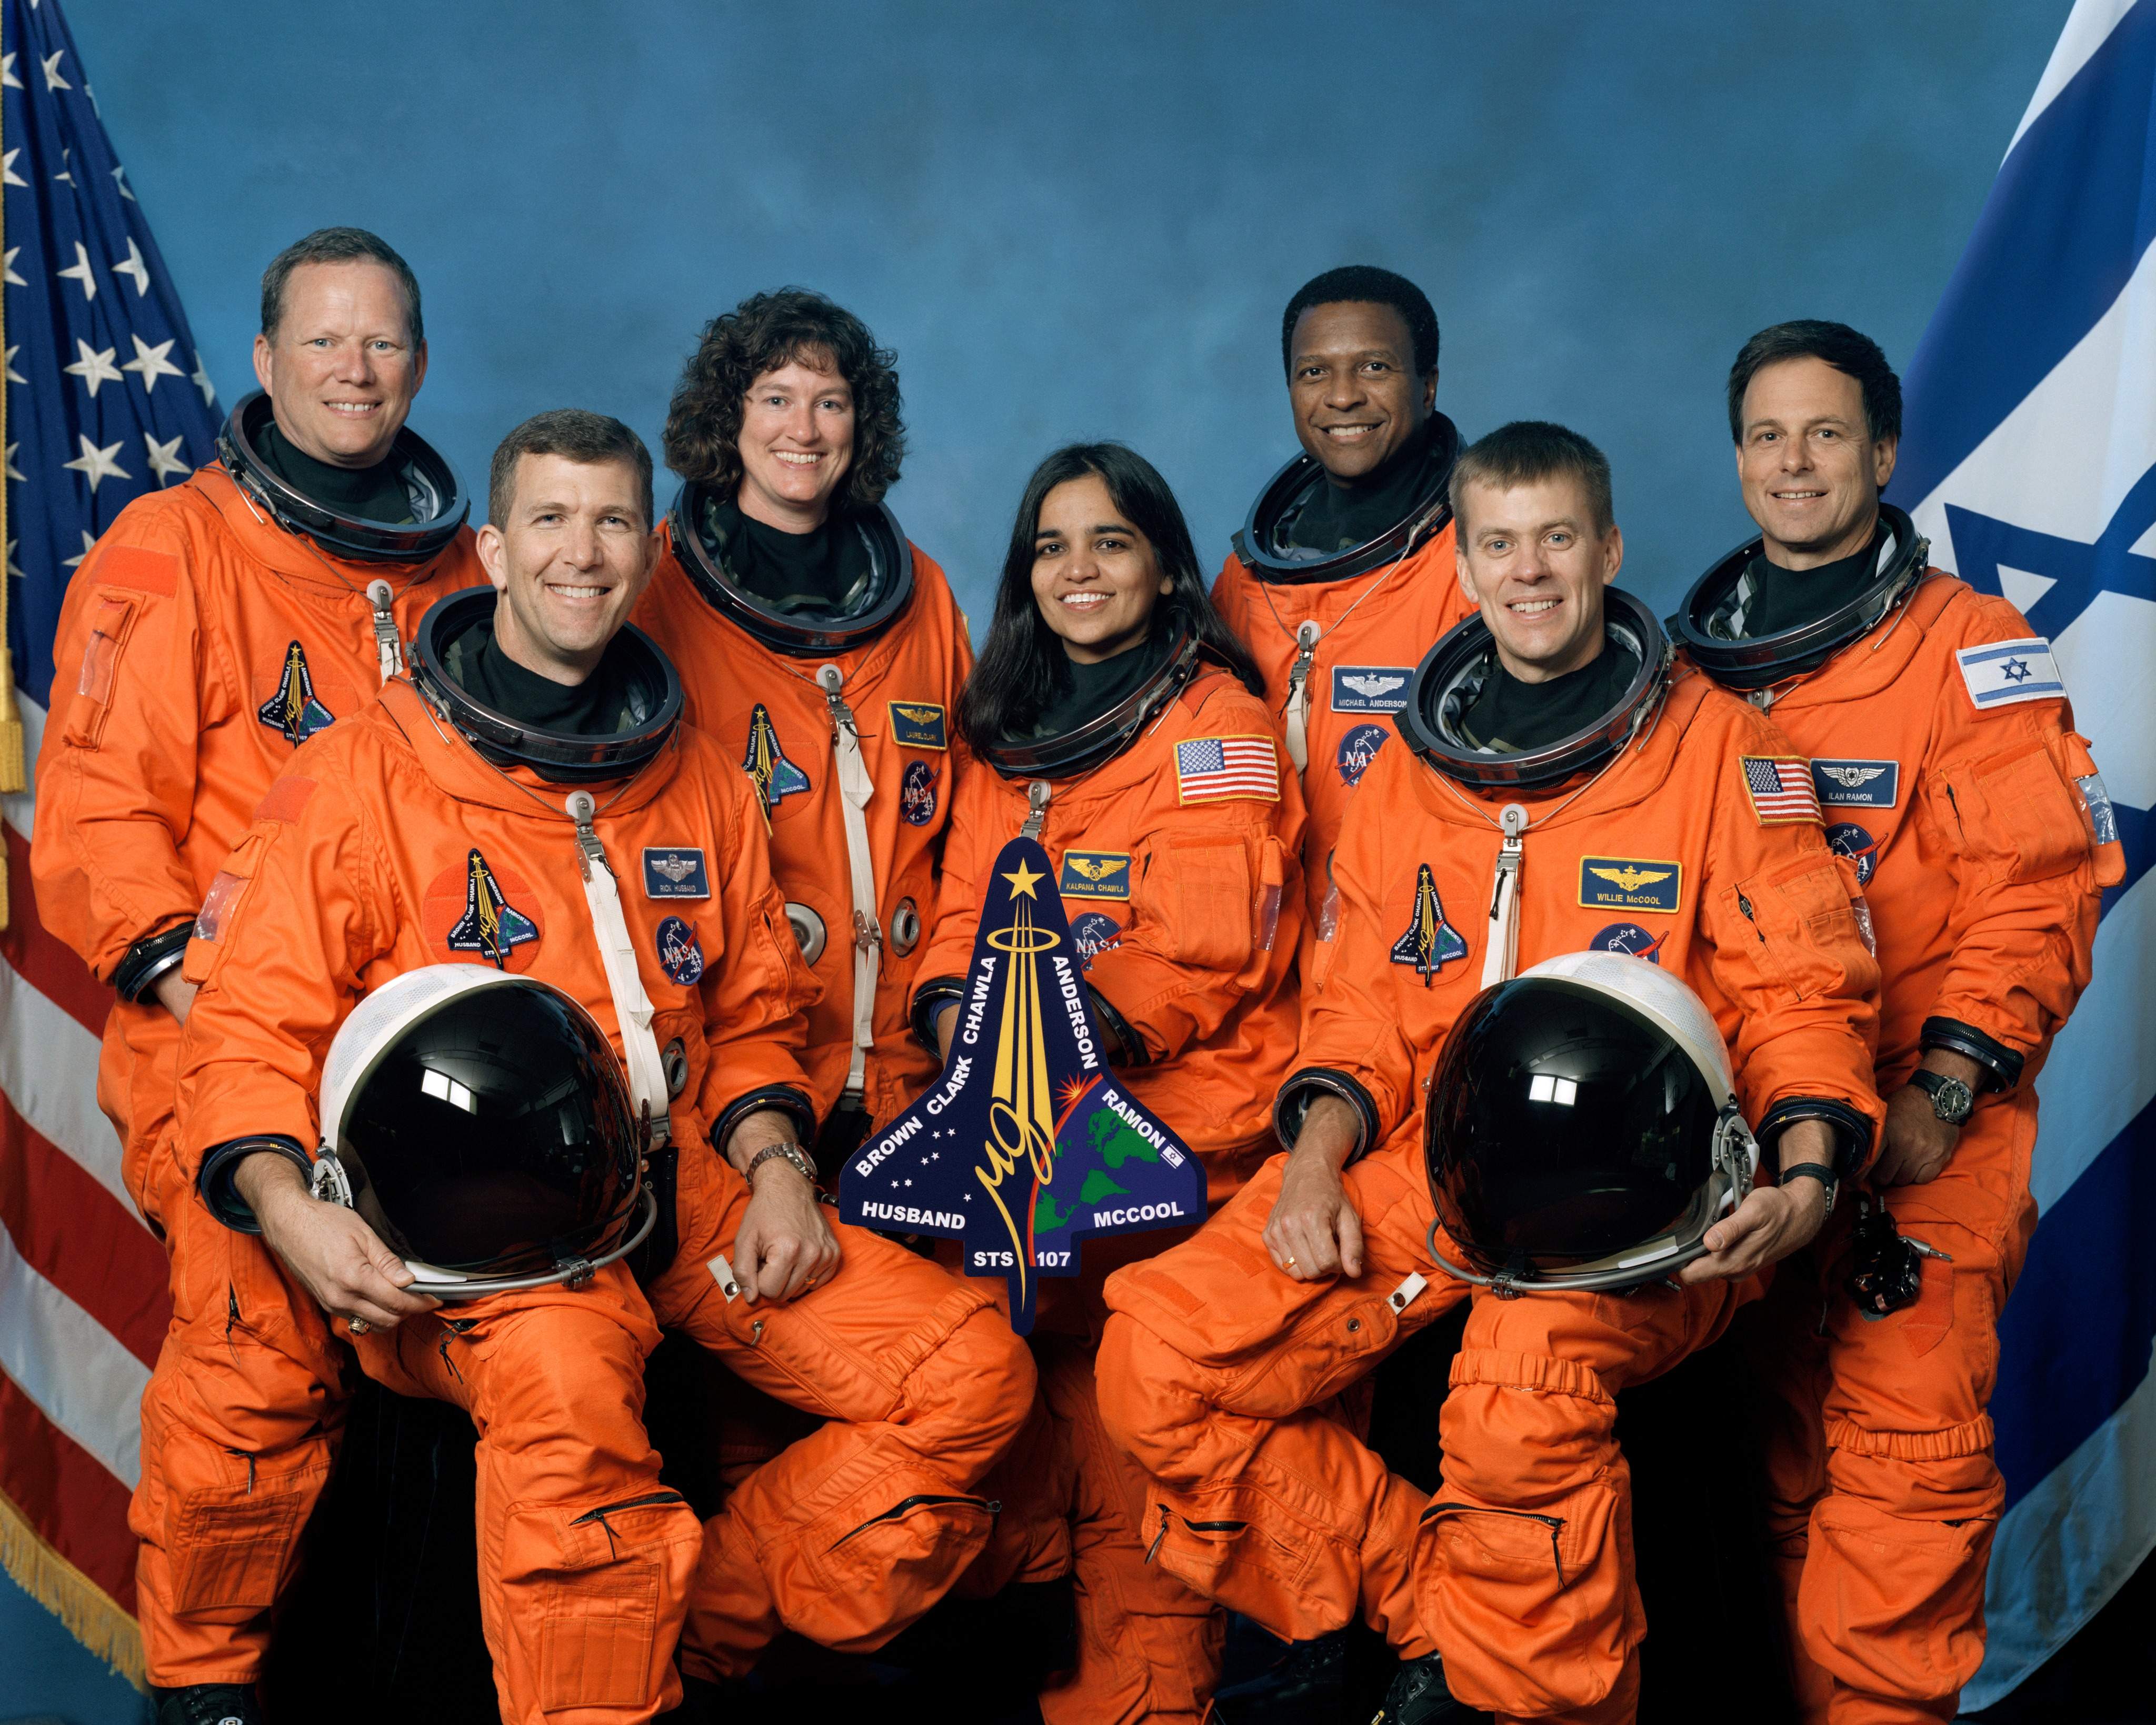 The crew of Space Shuttle Columbia's mission STS-107 take a break from their training regime to pose for the traditional crew portrait. Seated in front are astronauts Rick D. Husband (L), mission commander; Kalpana Chawla, mission specialist; and William C. McCool, pilot. Standing are (L to R) astronauts David M. Brown, Laurel B. Clark, and Michael P. Anderson, all mission specialists; and Ilan Ramon, payload specialist representing the Israeli Space Agency.